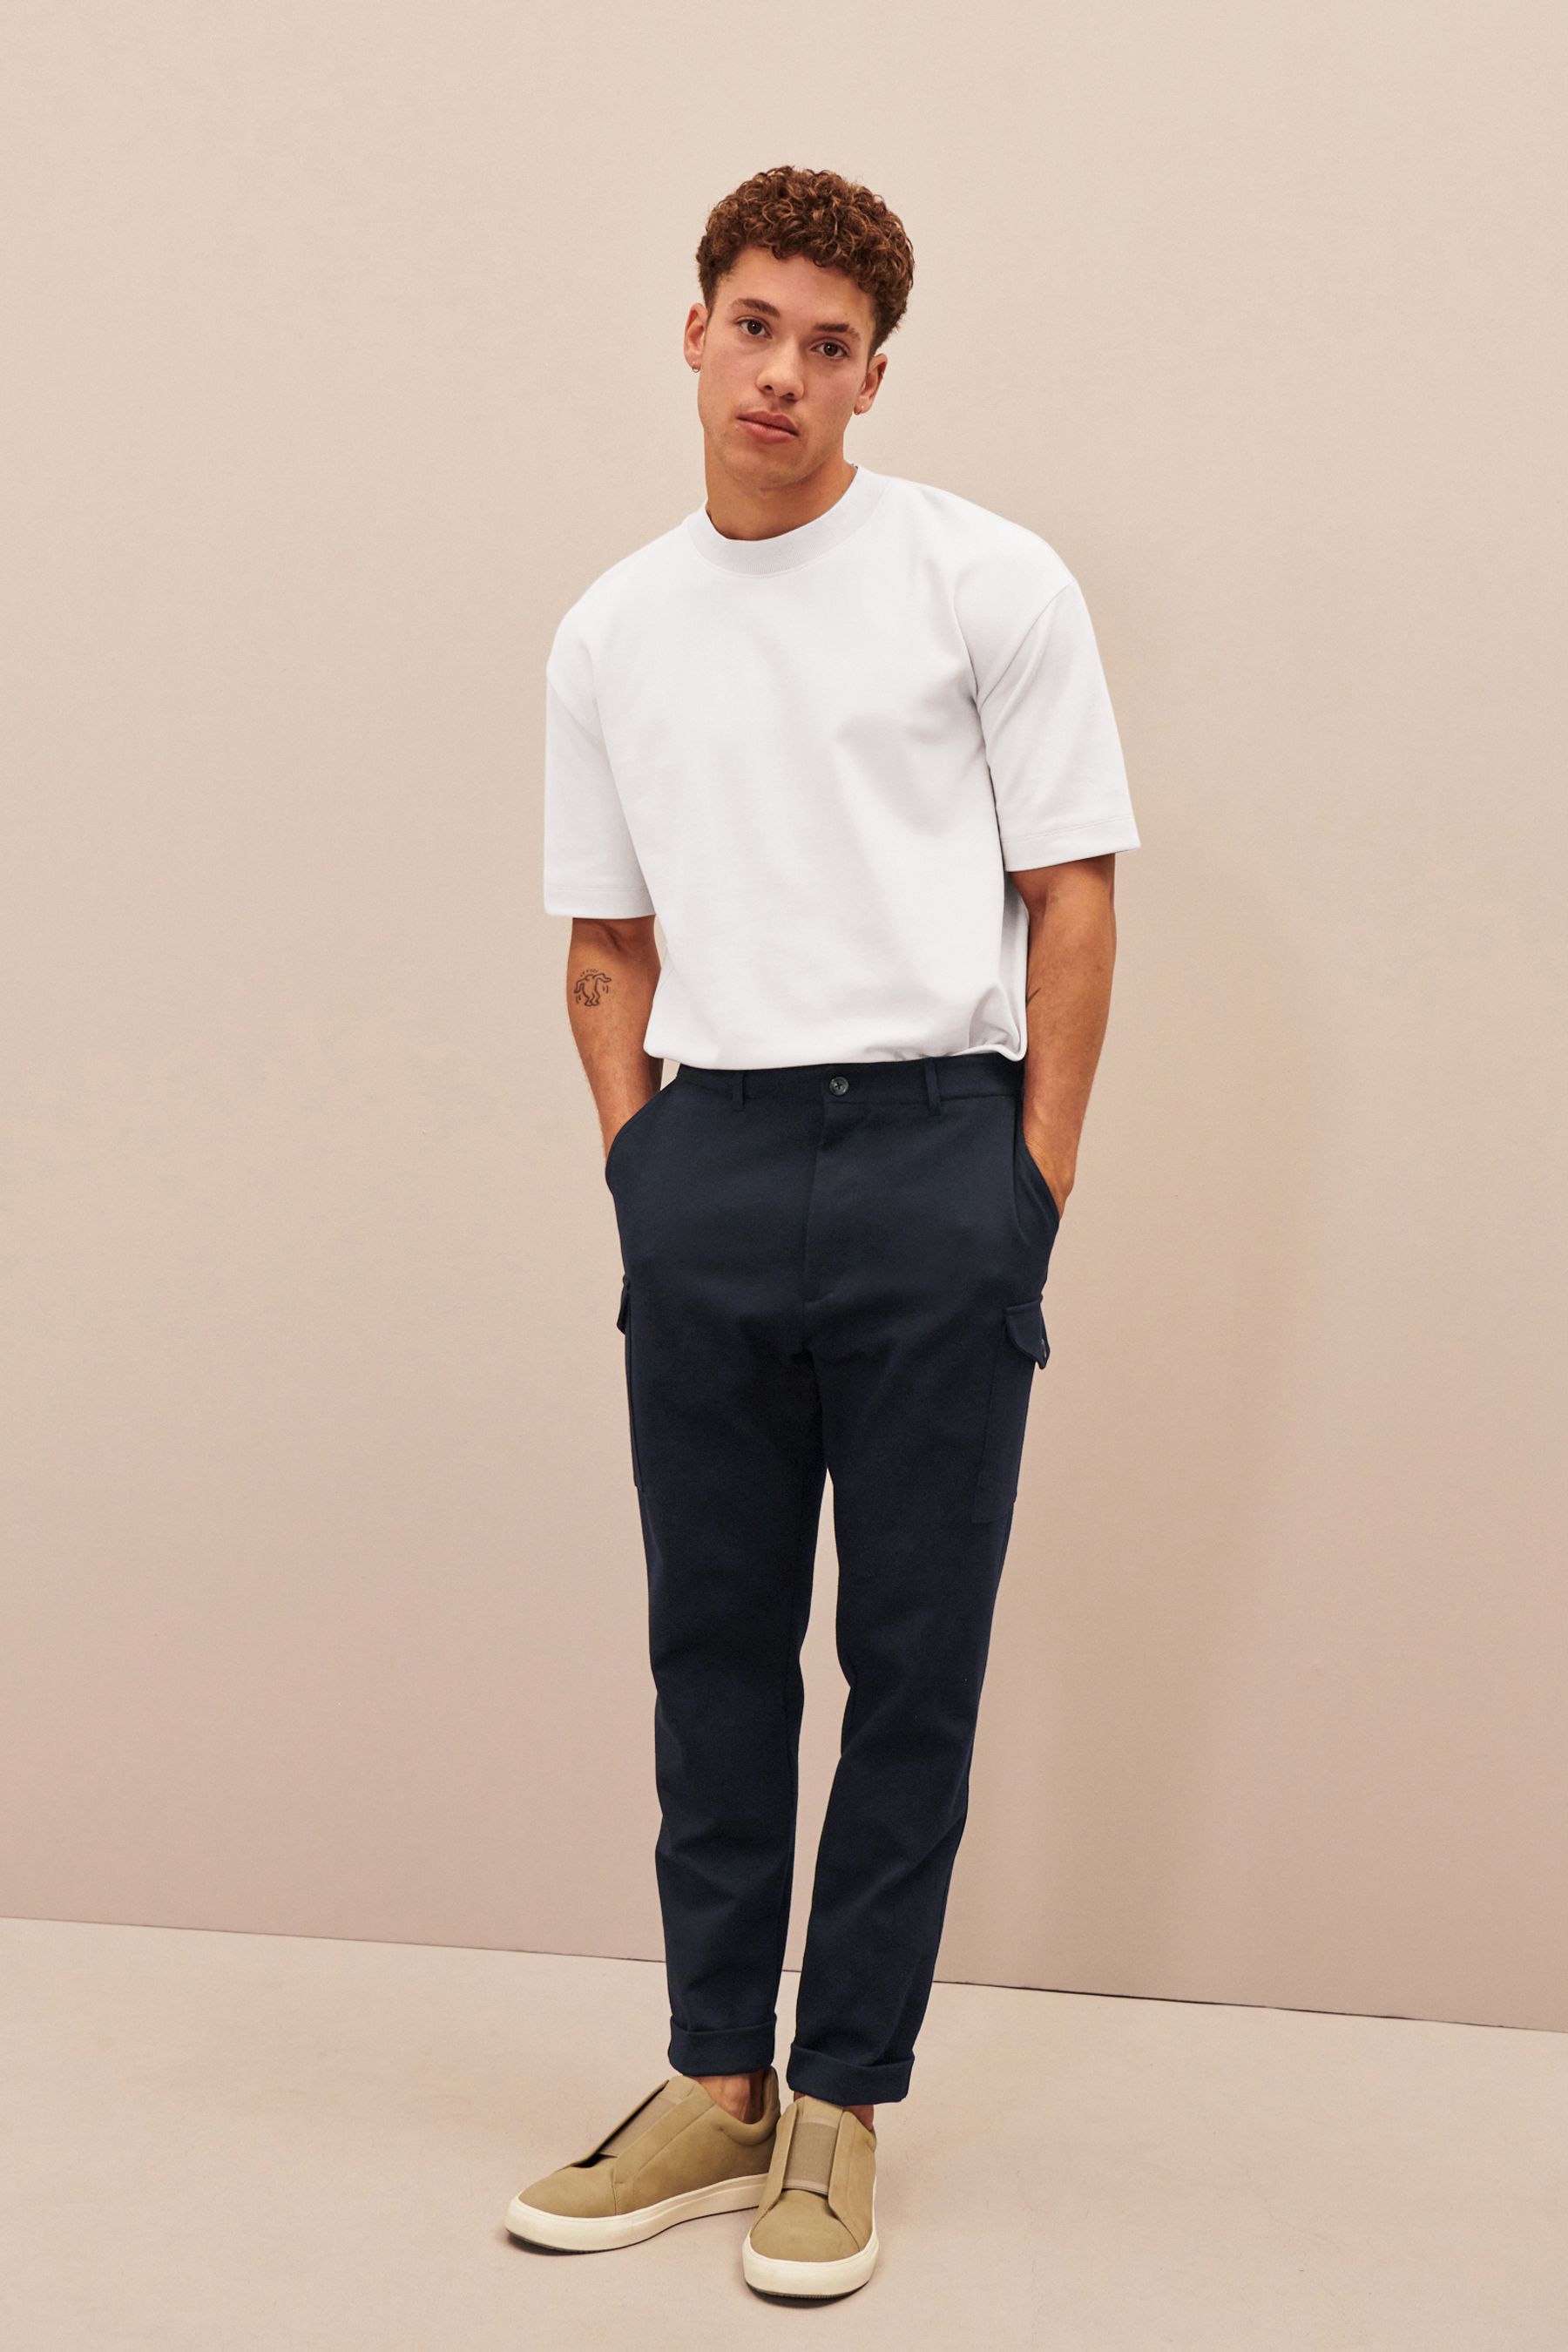 Buy Navy Blue EDIT Cargo Trousers from the Next UK online shop